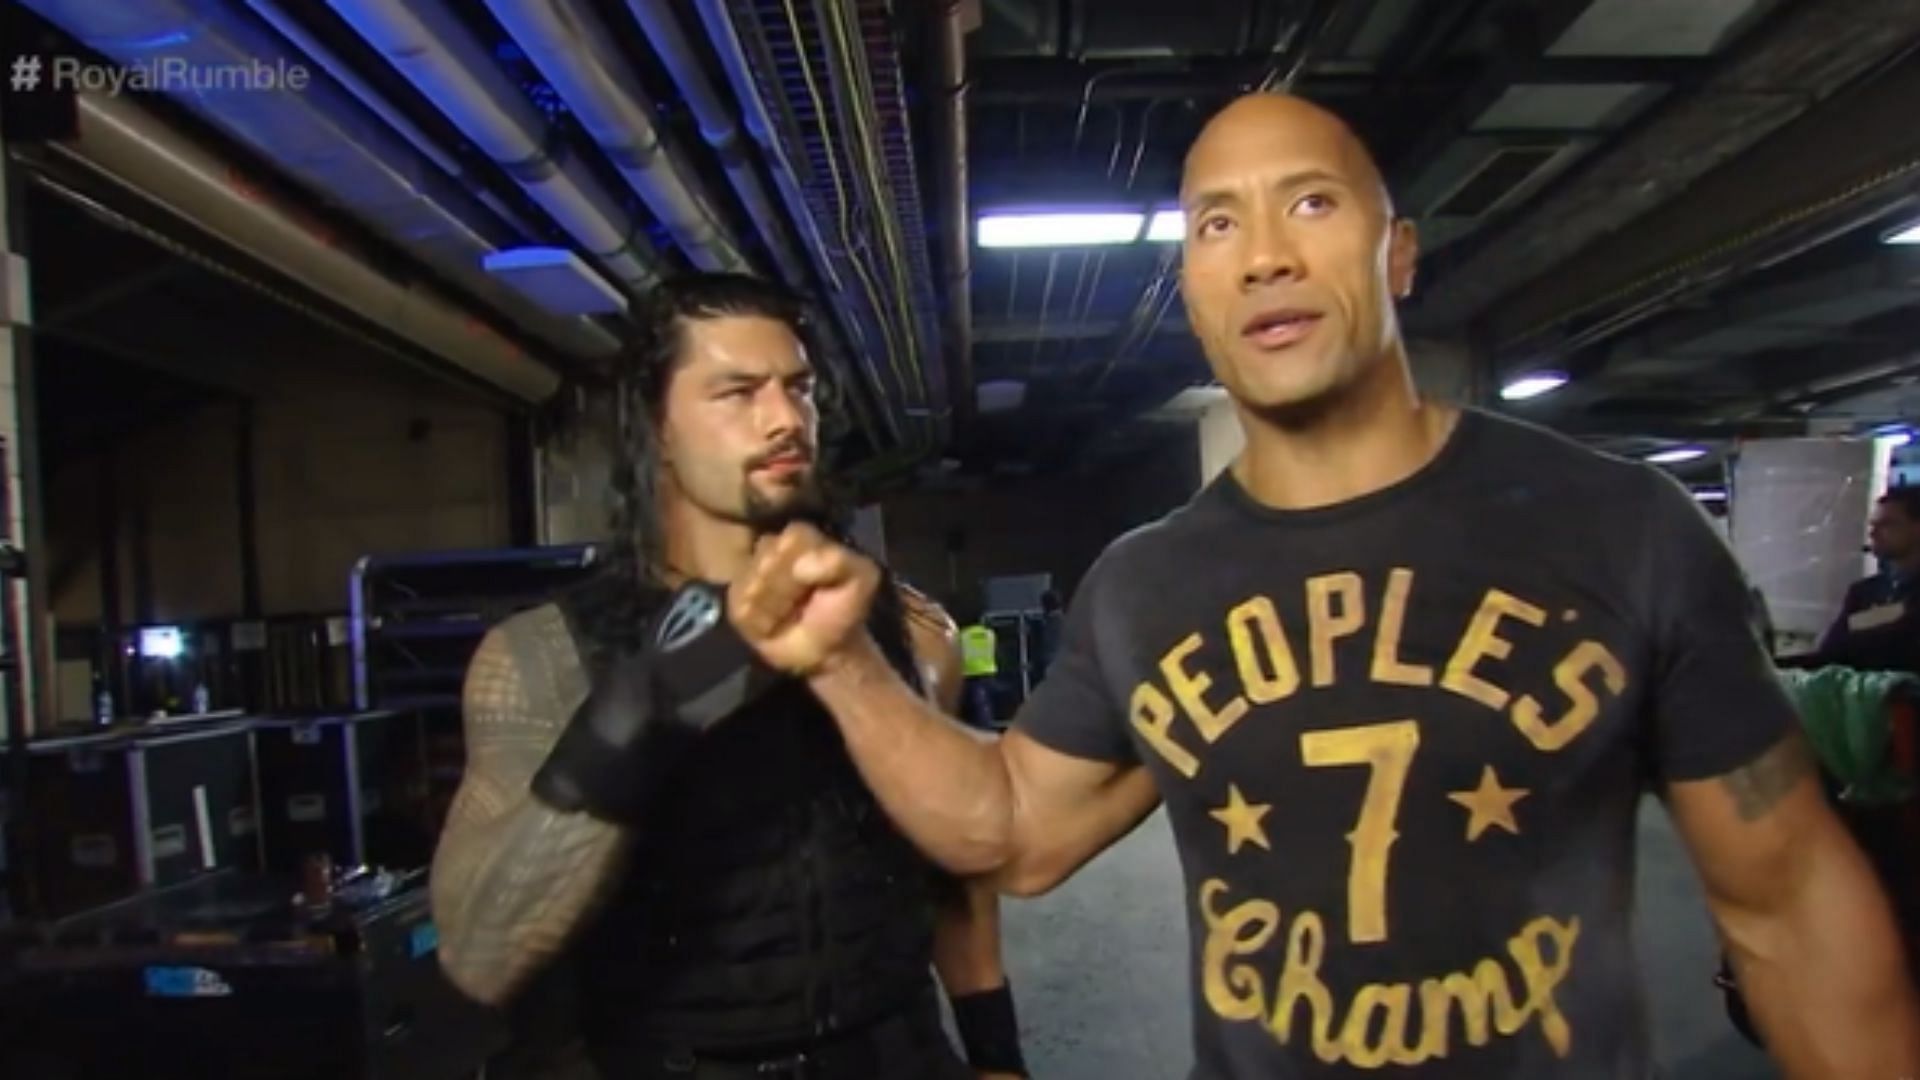 The Rock came to the aid of Roman Reigns at the Royal Rumble 2015.